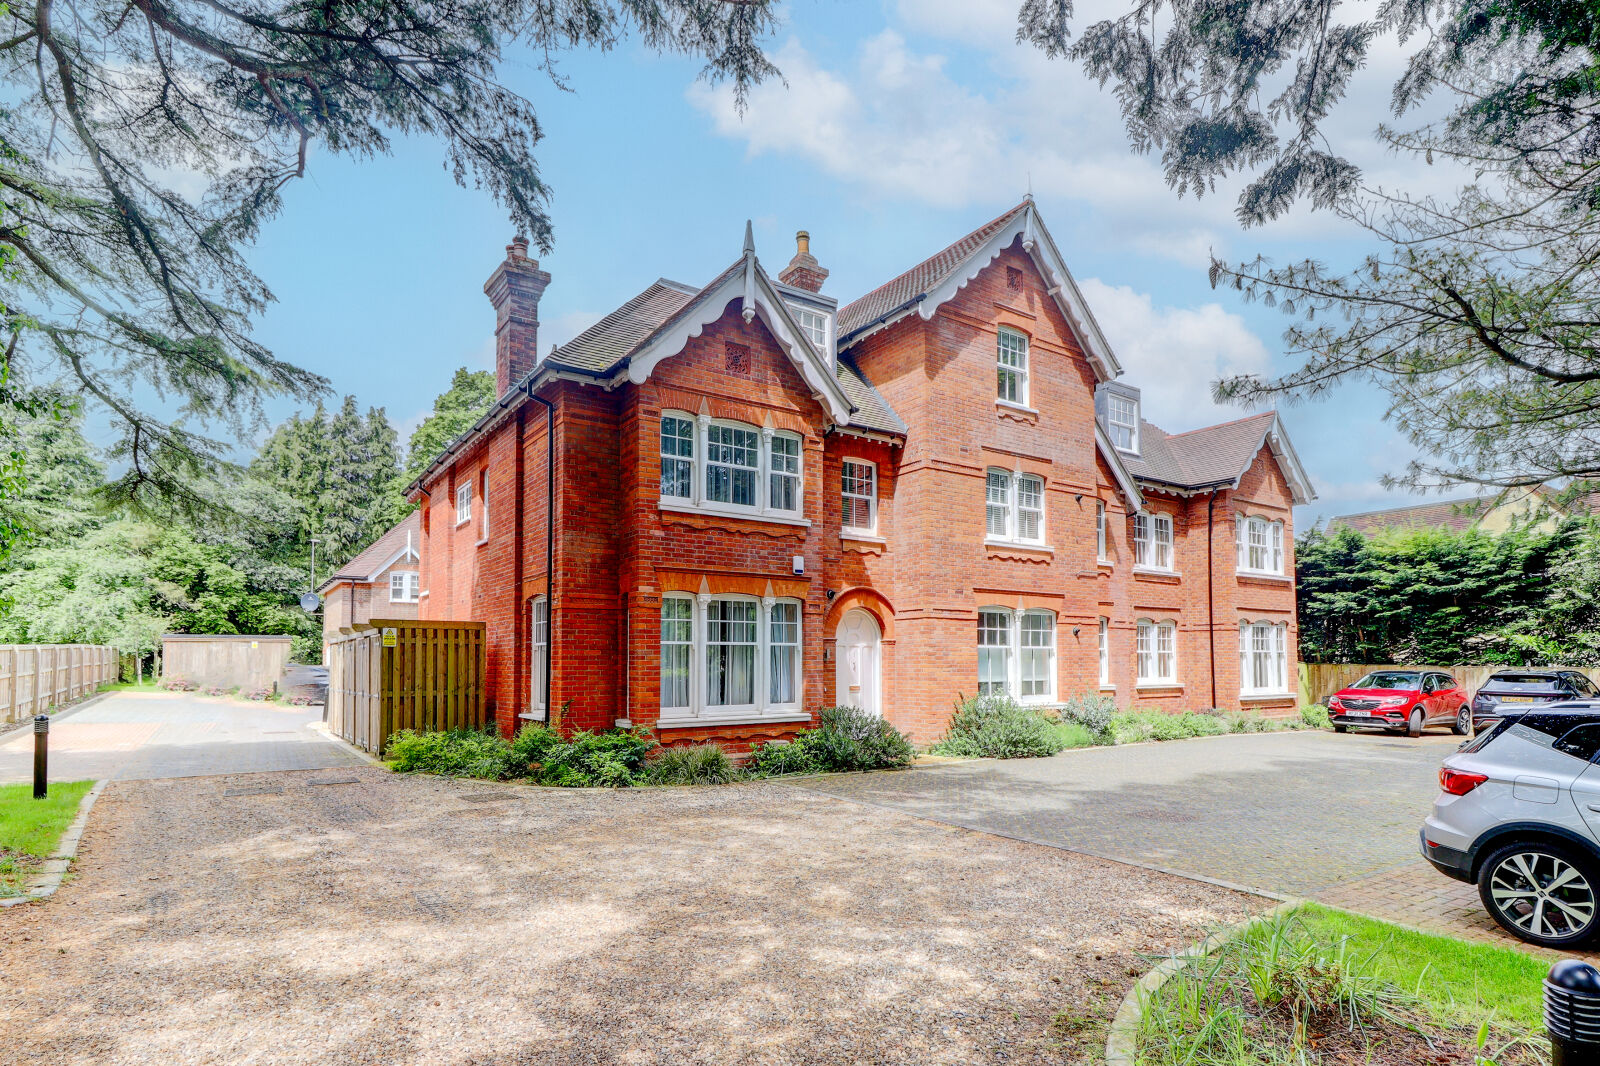 1 bedroom  flat for sale Amersham Road, High Wycombe, HP13, main image